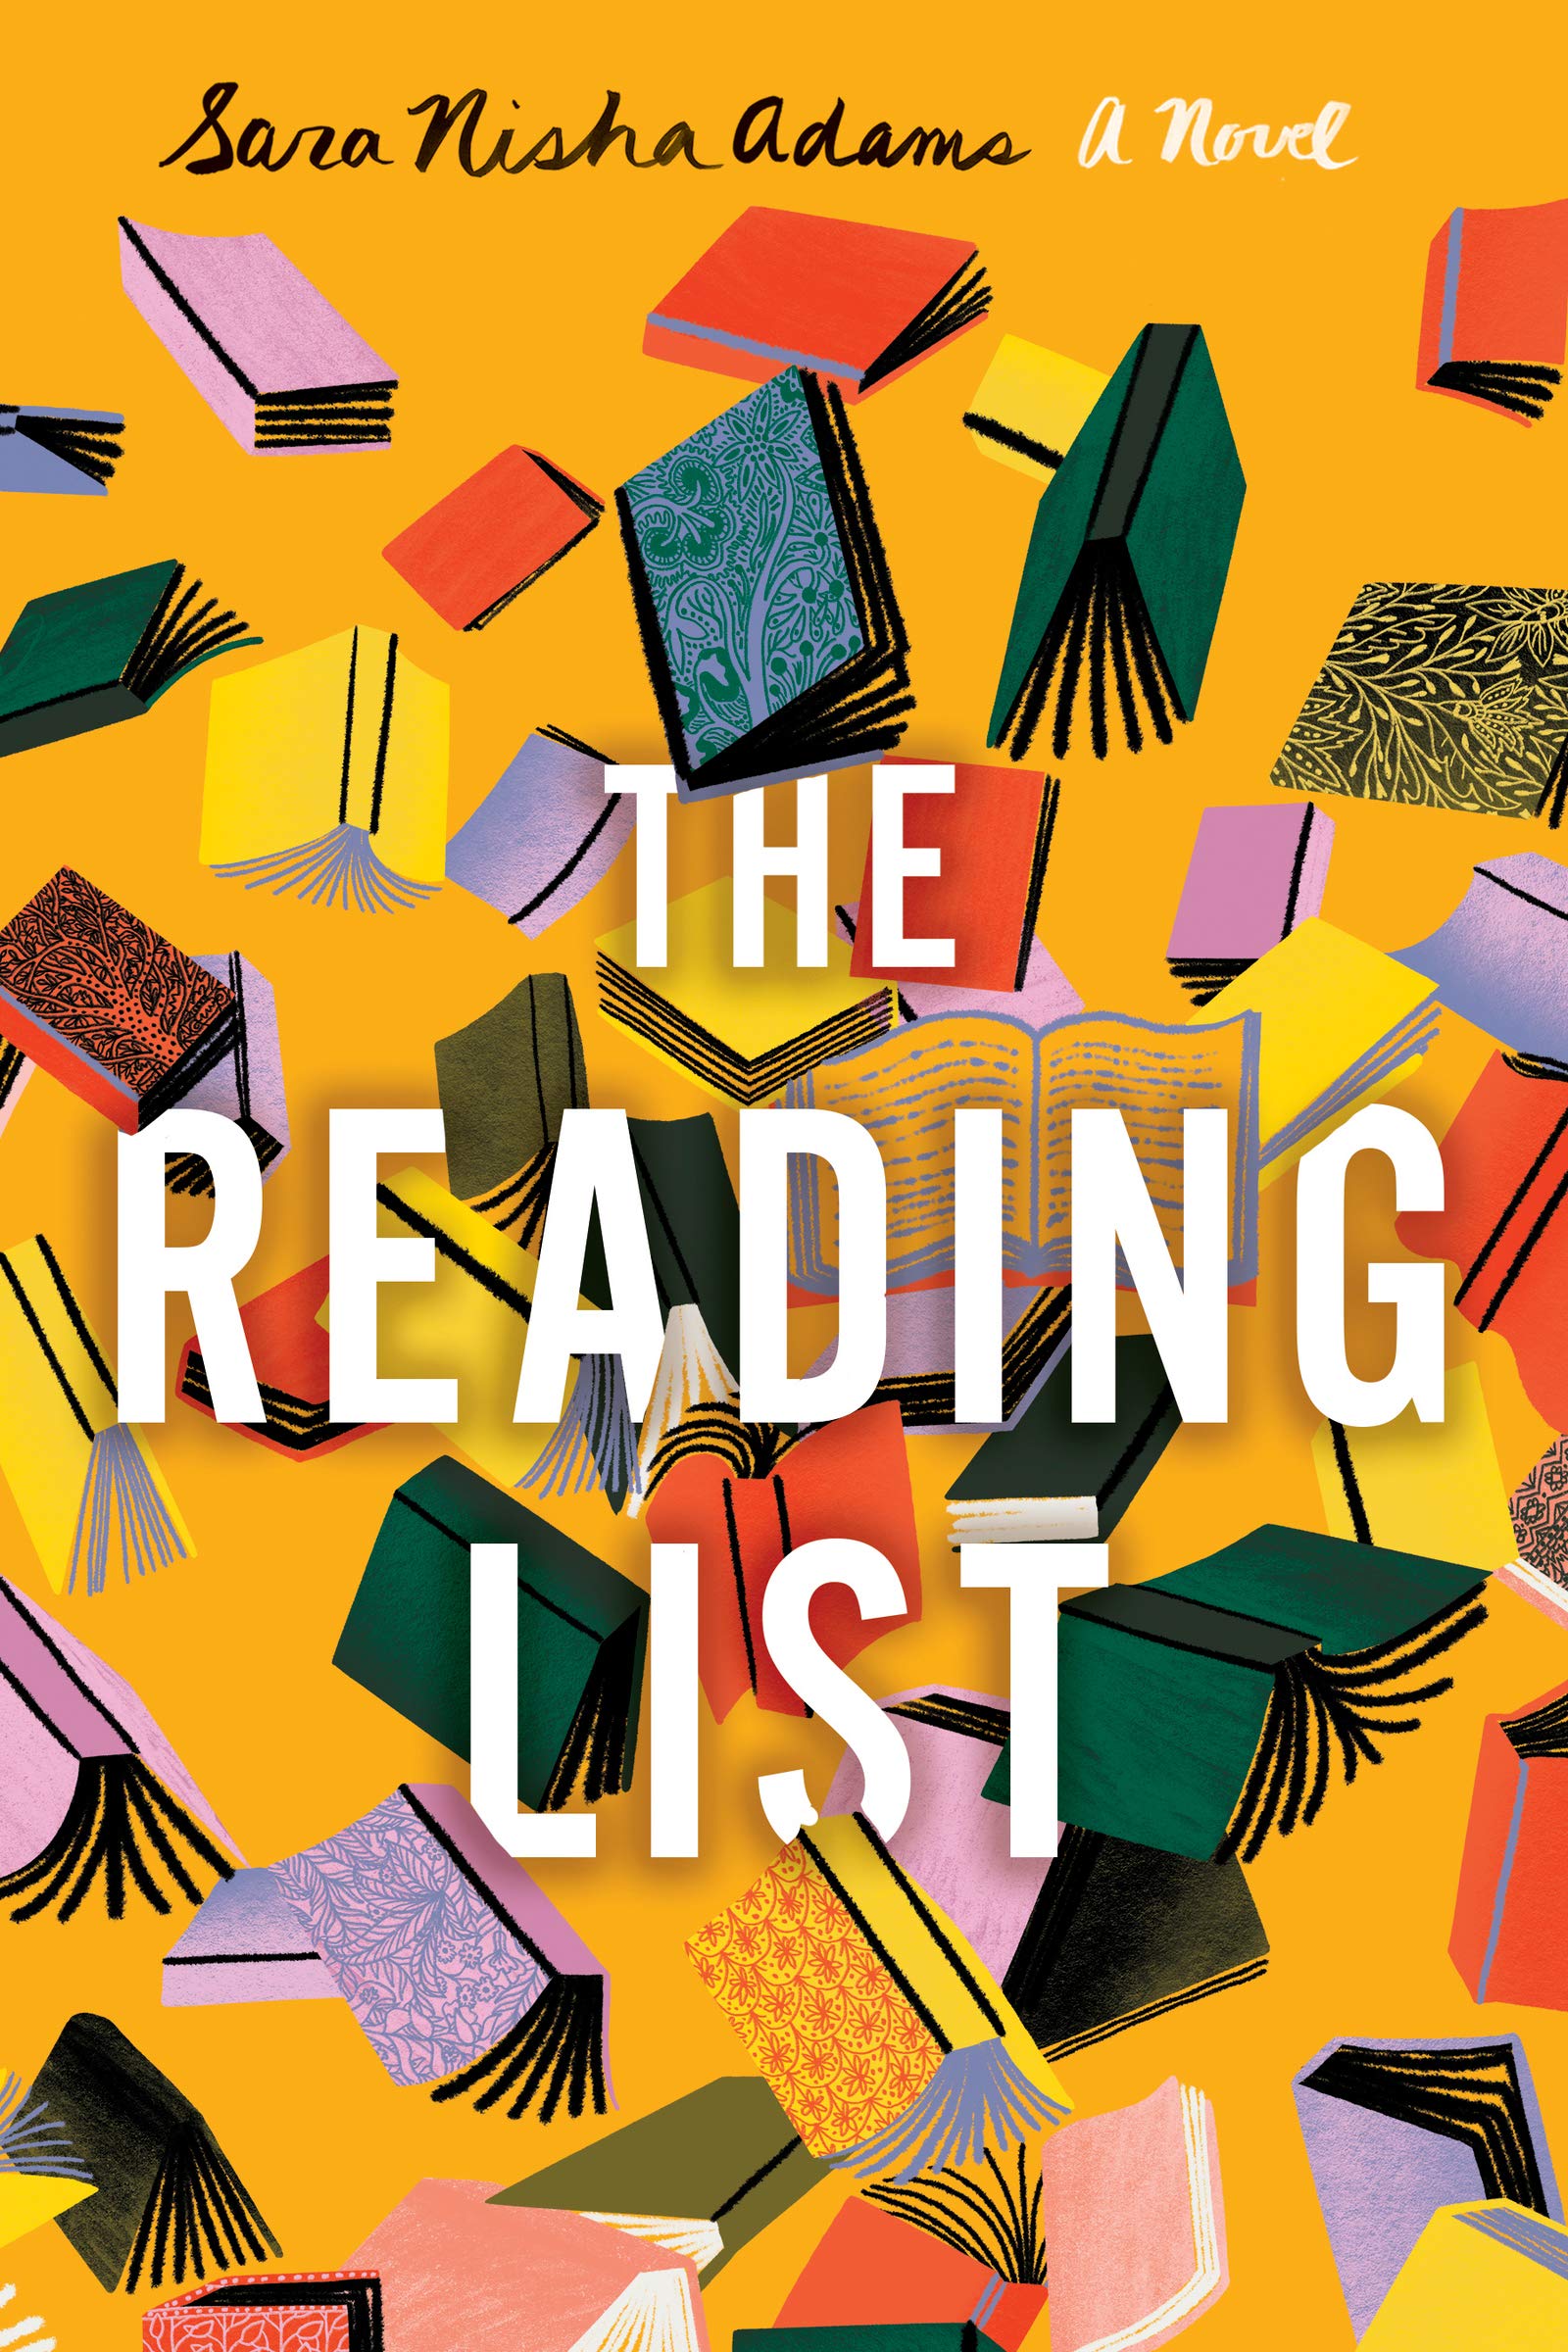 Cover Image for "The Reading List"